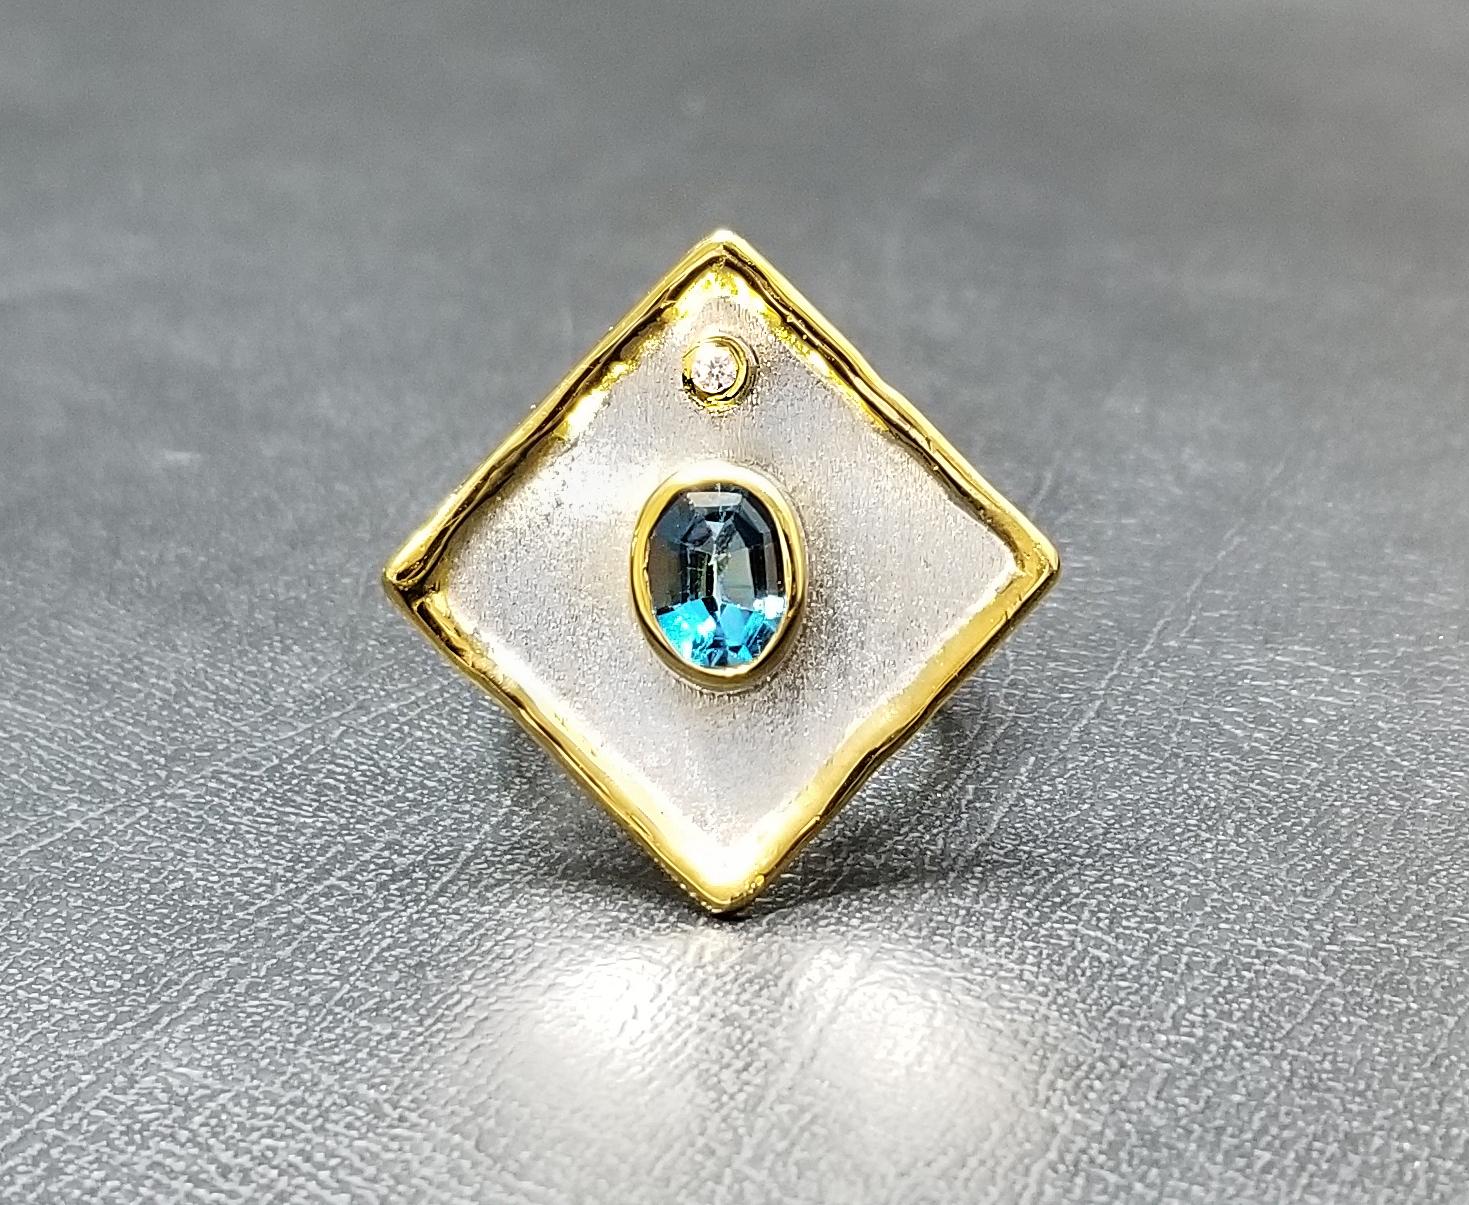 Presenting Yianni Creations - Ammos Collection fully handcrafted ring from Fine Silver plated with Palladium to resist the elements. This geometric-shaped ring features 1.60 Carat London Blue Topaz accompanied by 0.03 Carat Brilliant Cut White